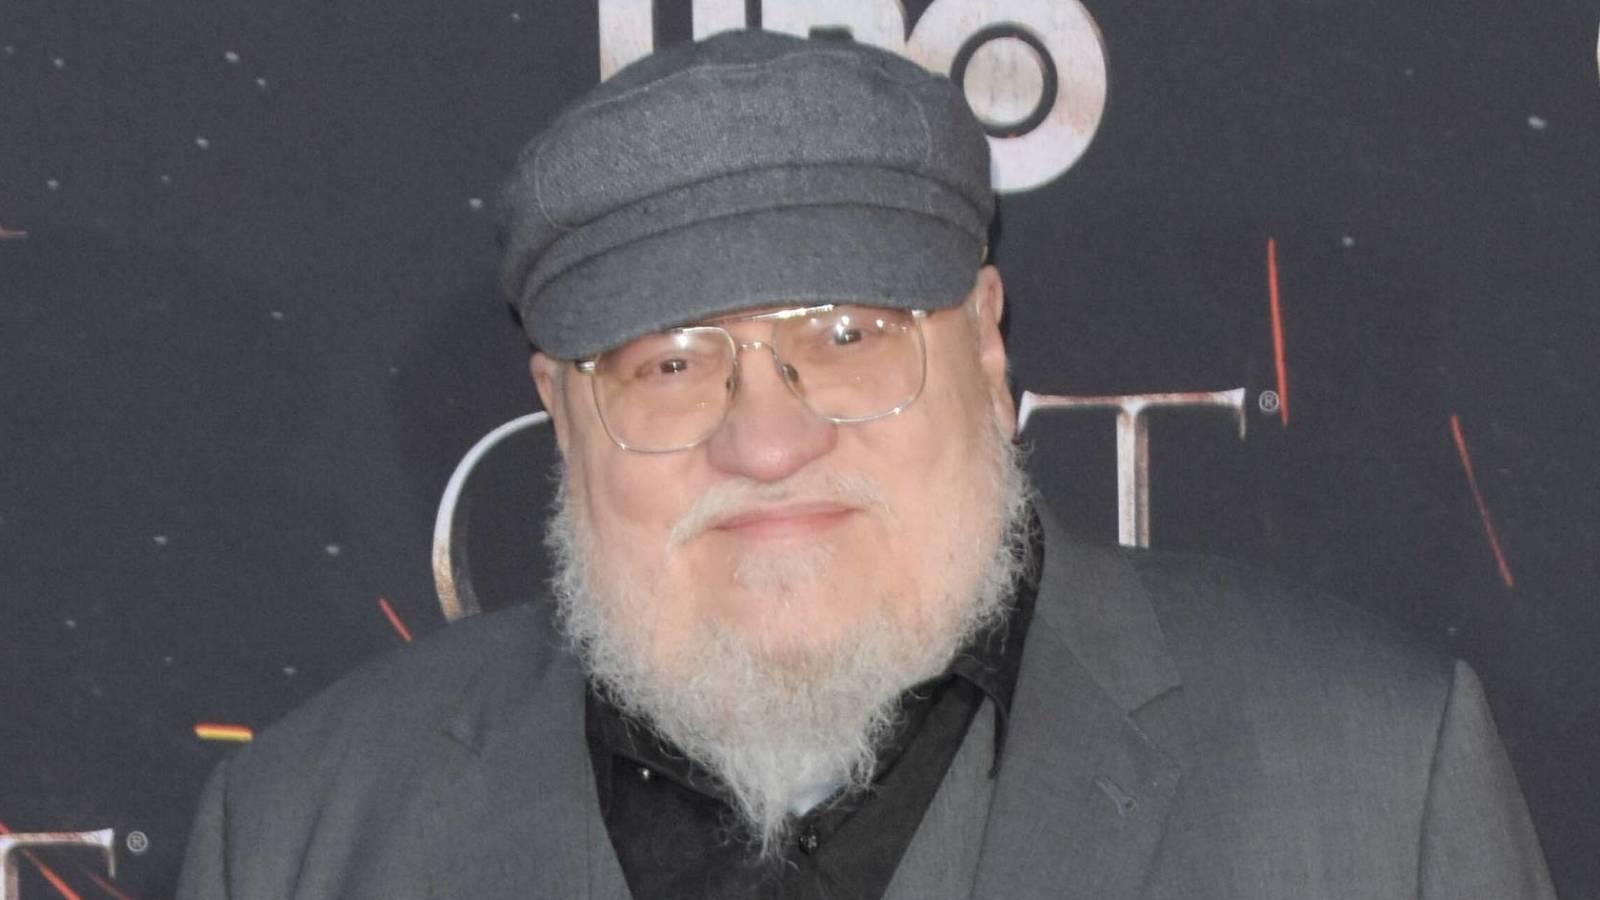 Game of Thrones' author George R.R. Martin rips into Giants over